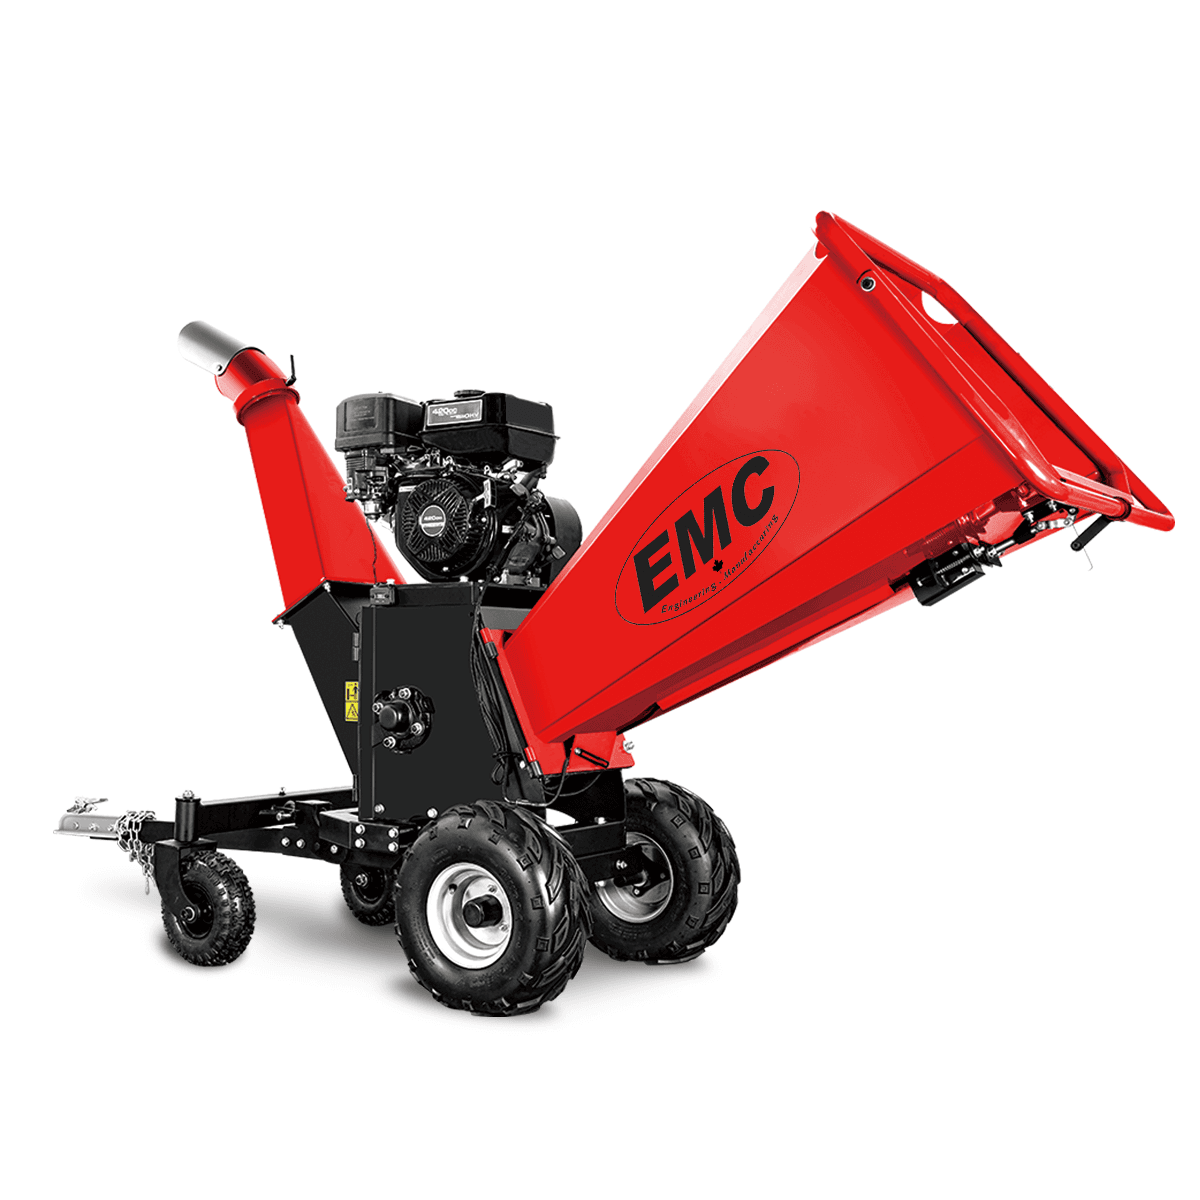 Value Industrial Portable 6” Wood Chipper